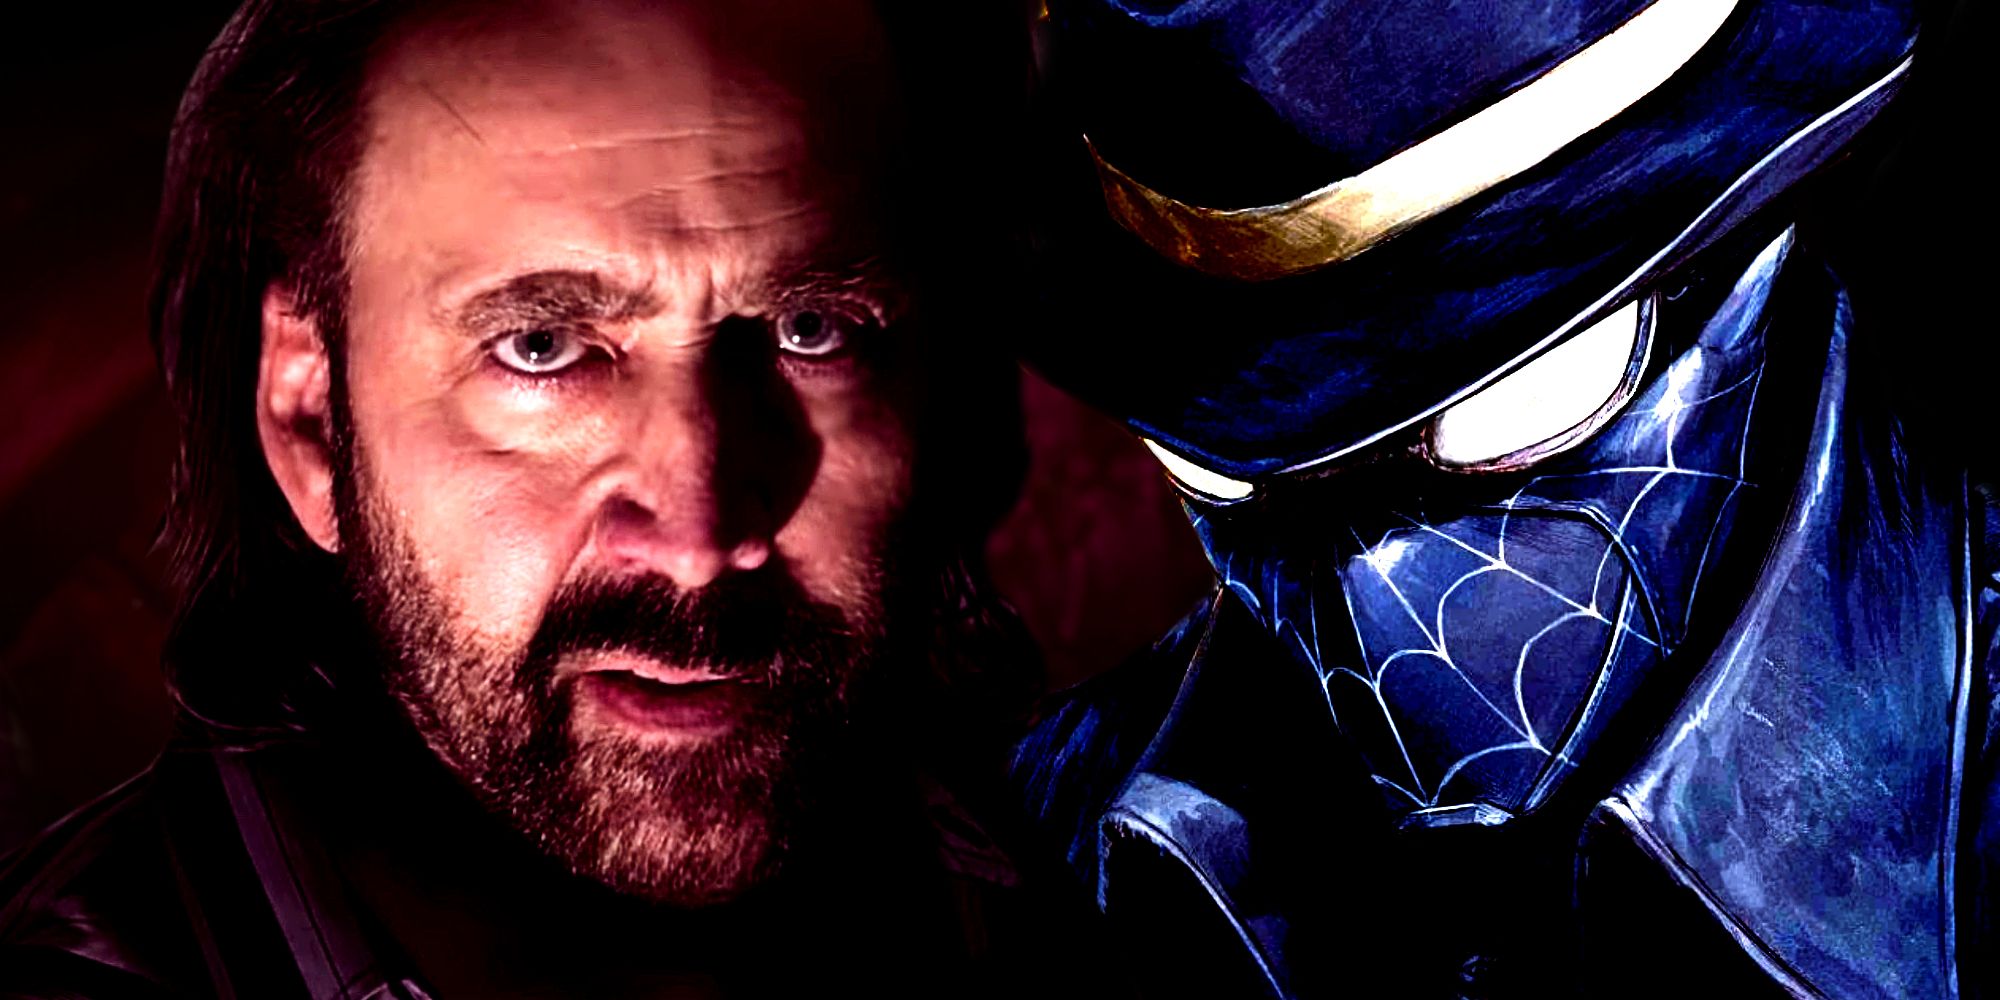 Nicolas Cage Looks Ominously at the Camera Next to Spider-Man Noir in Marvel Comics